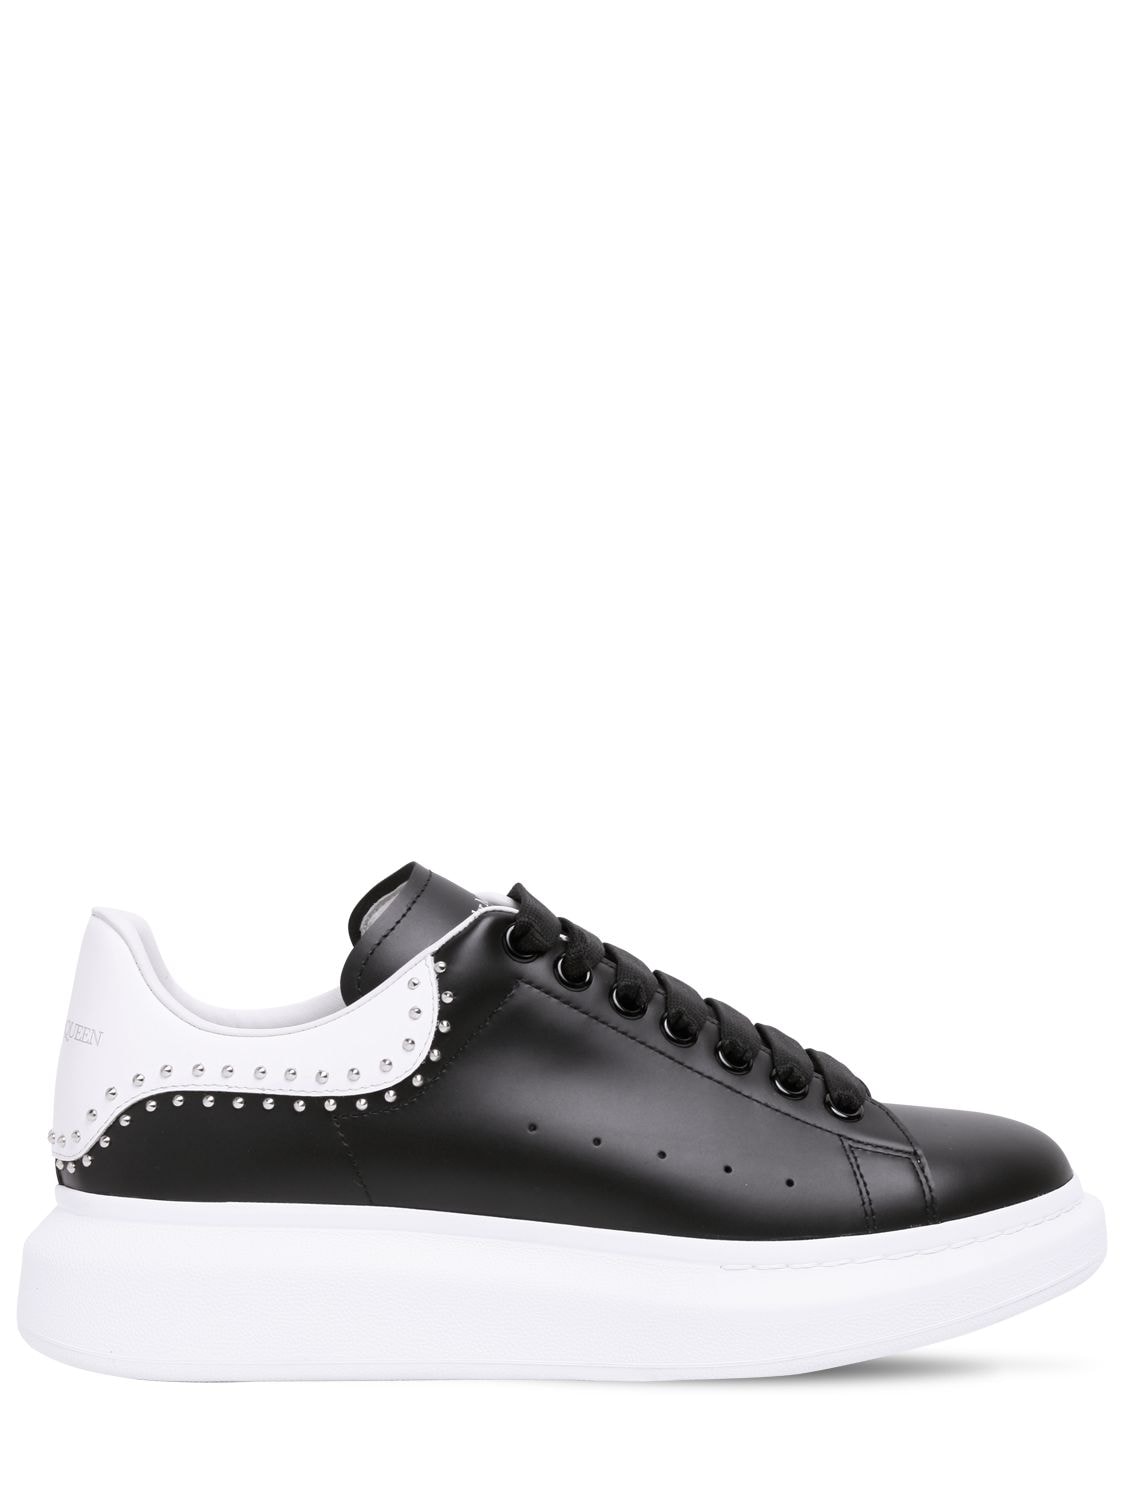 alexander mcqueen's white and black